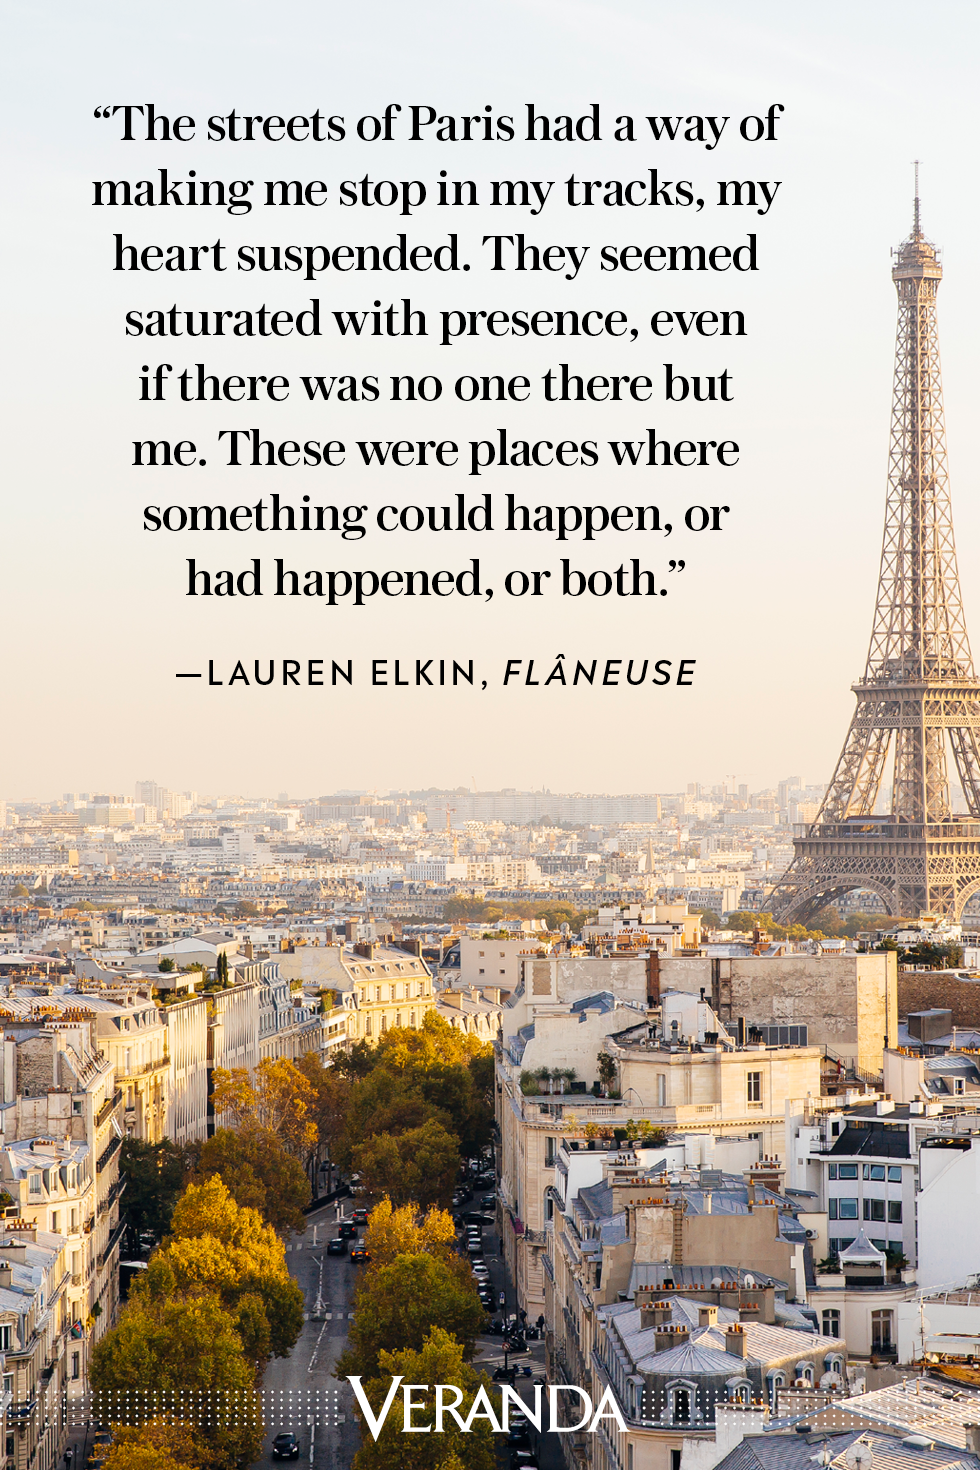 famous french quotes about life in french